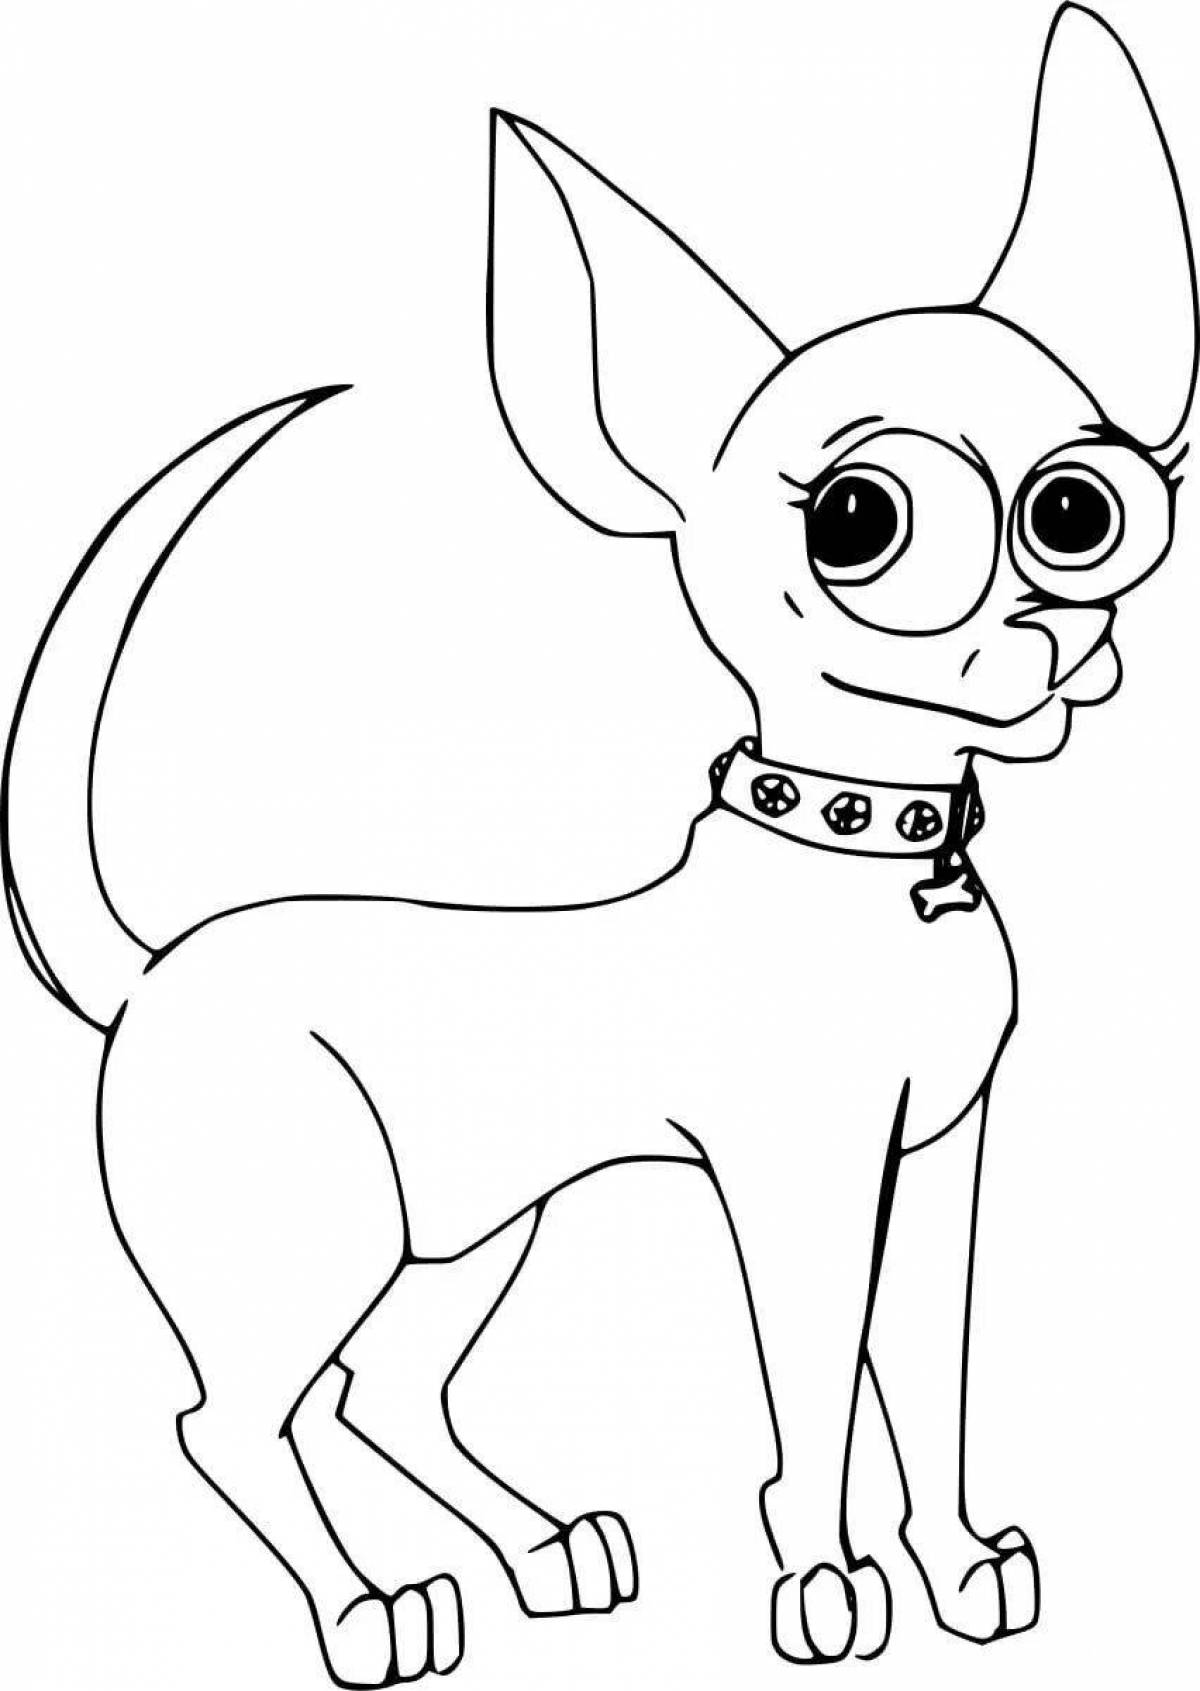 Curious toy terrier